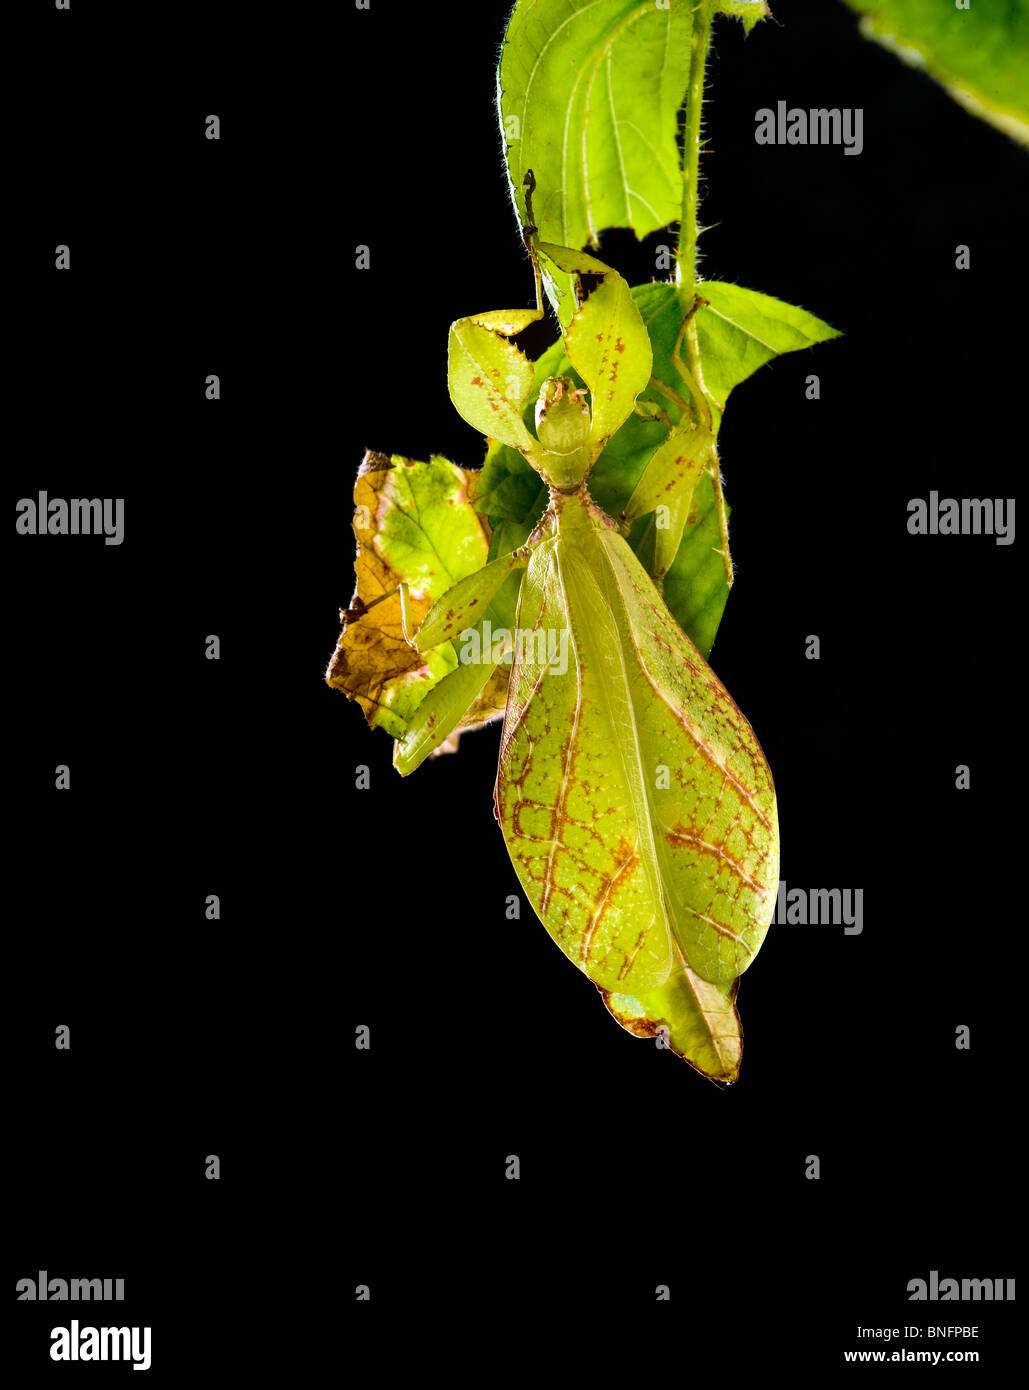 Phyllium Sp. philippines leaf insect eating eat  backlight translucent ghost ghostly dark background black leafinsect stick appe Stock Photo